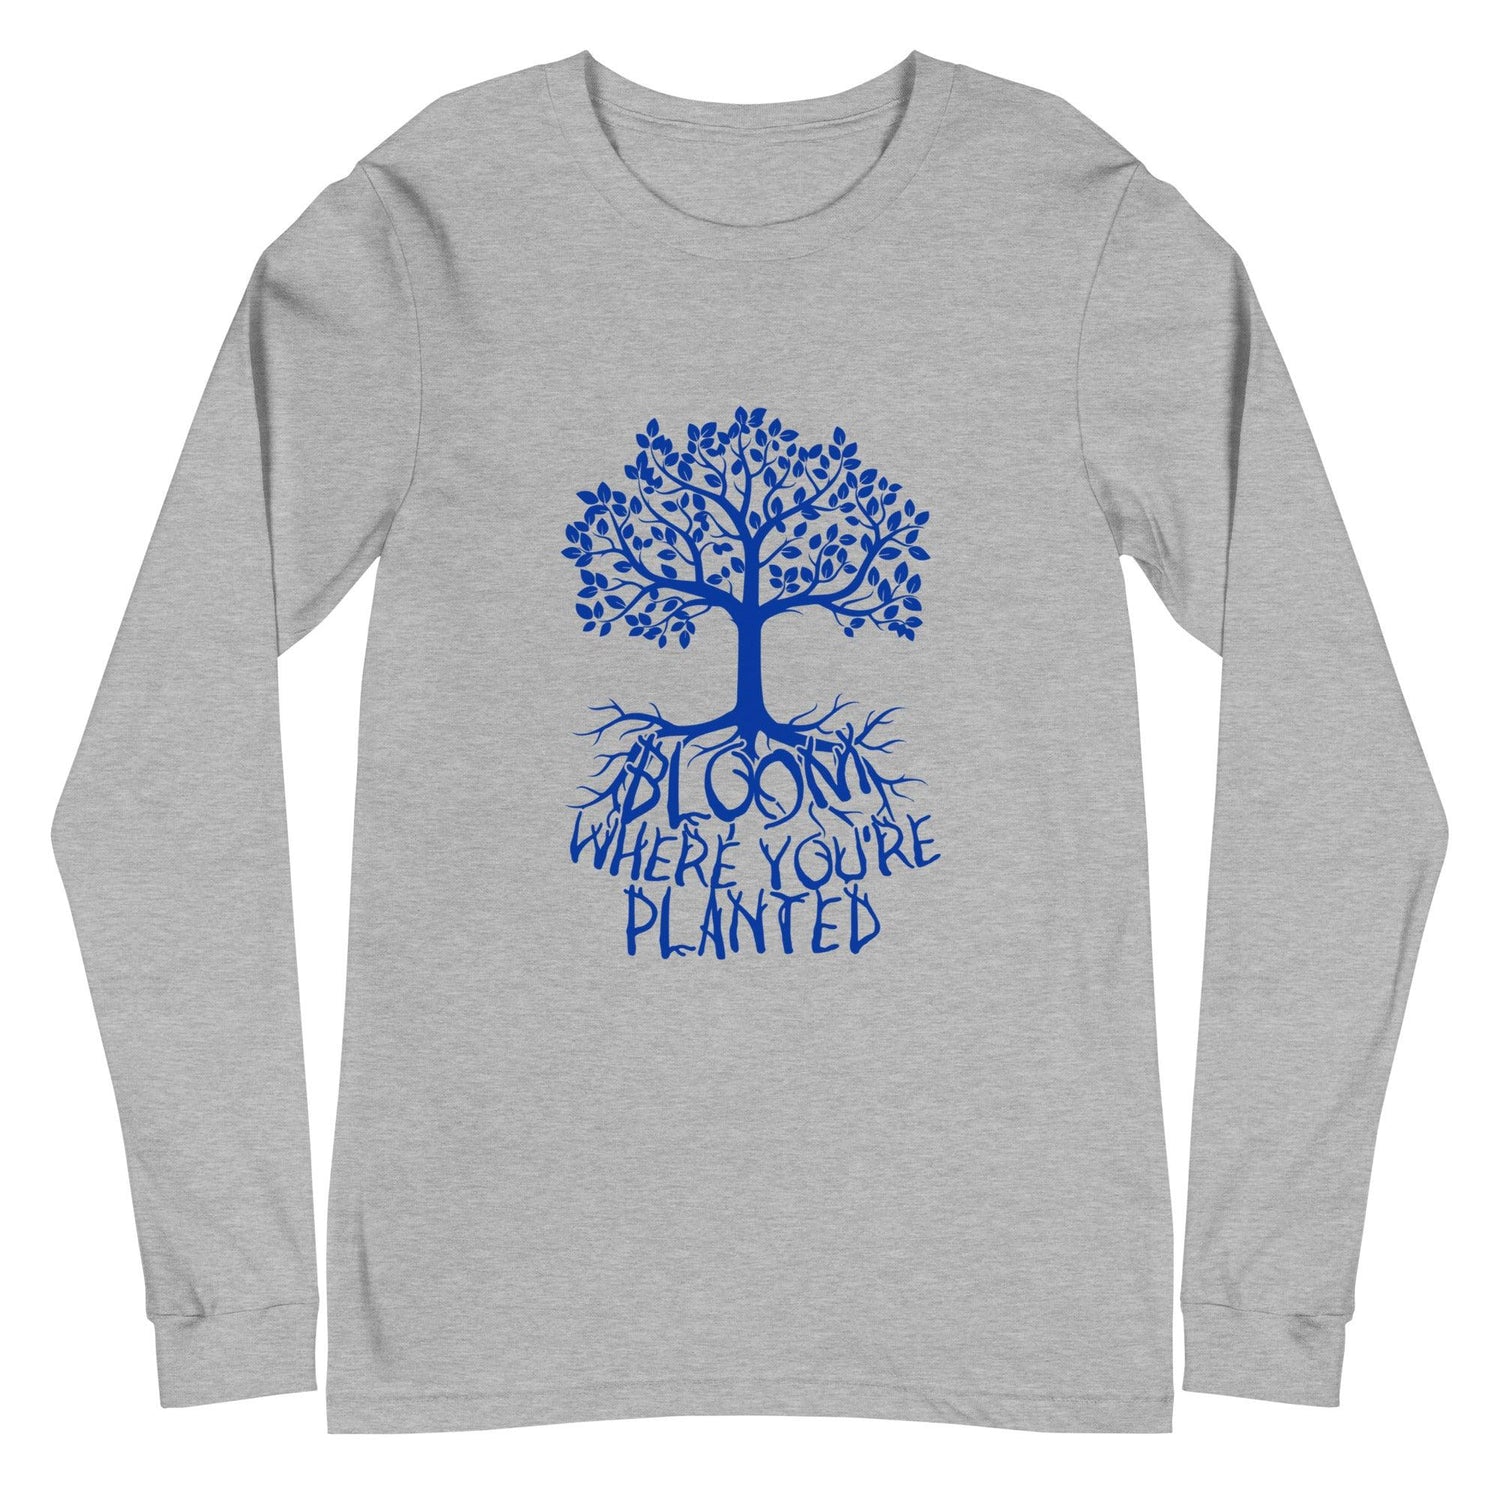 Nate Sestina "Where You're Planted" Long Sleeve Tee - Fan Arch